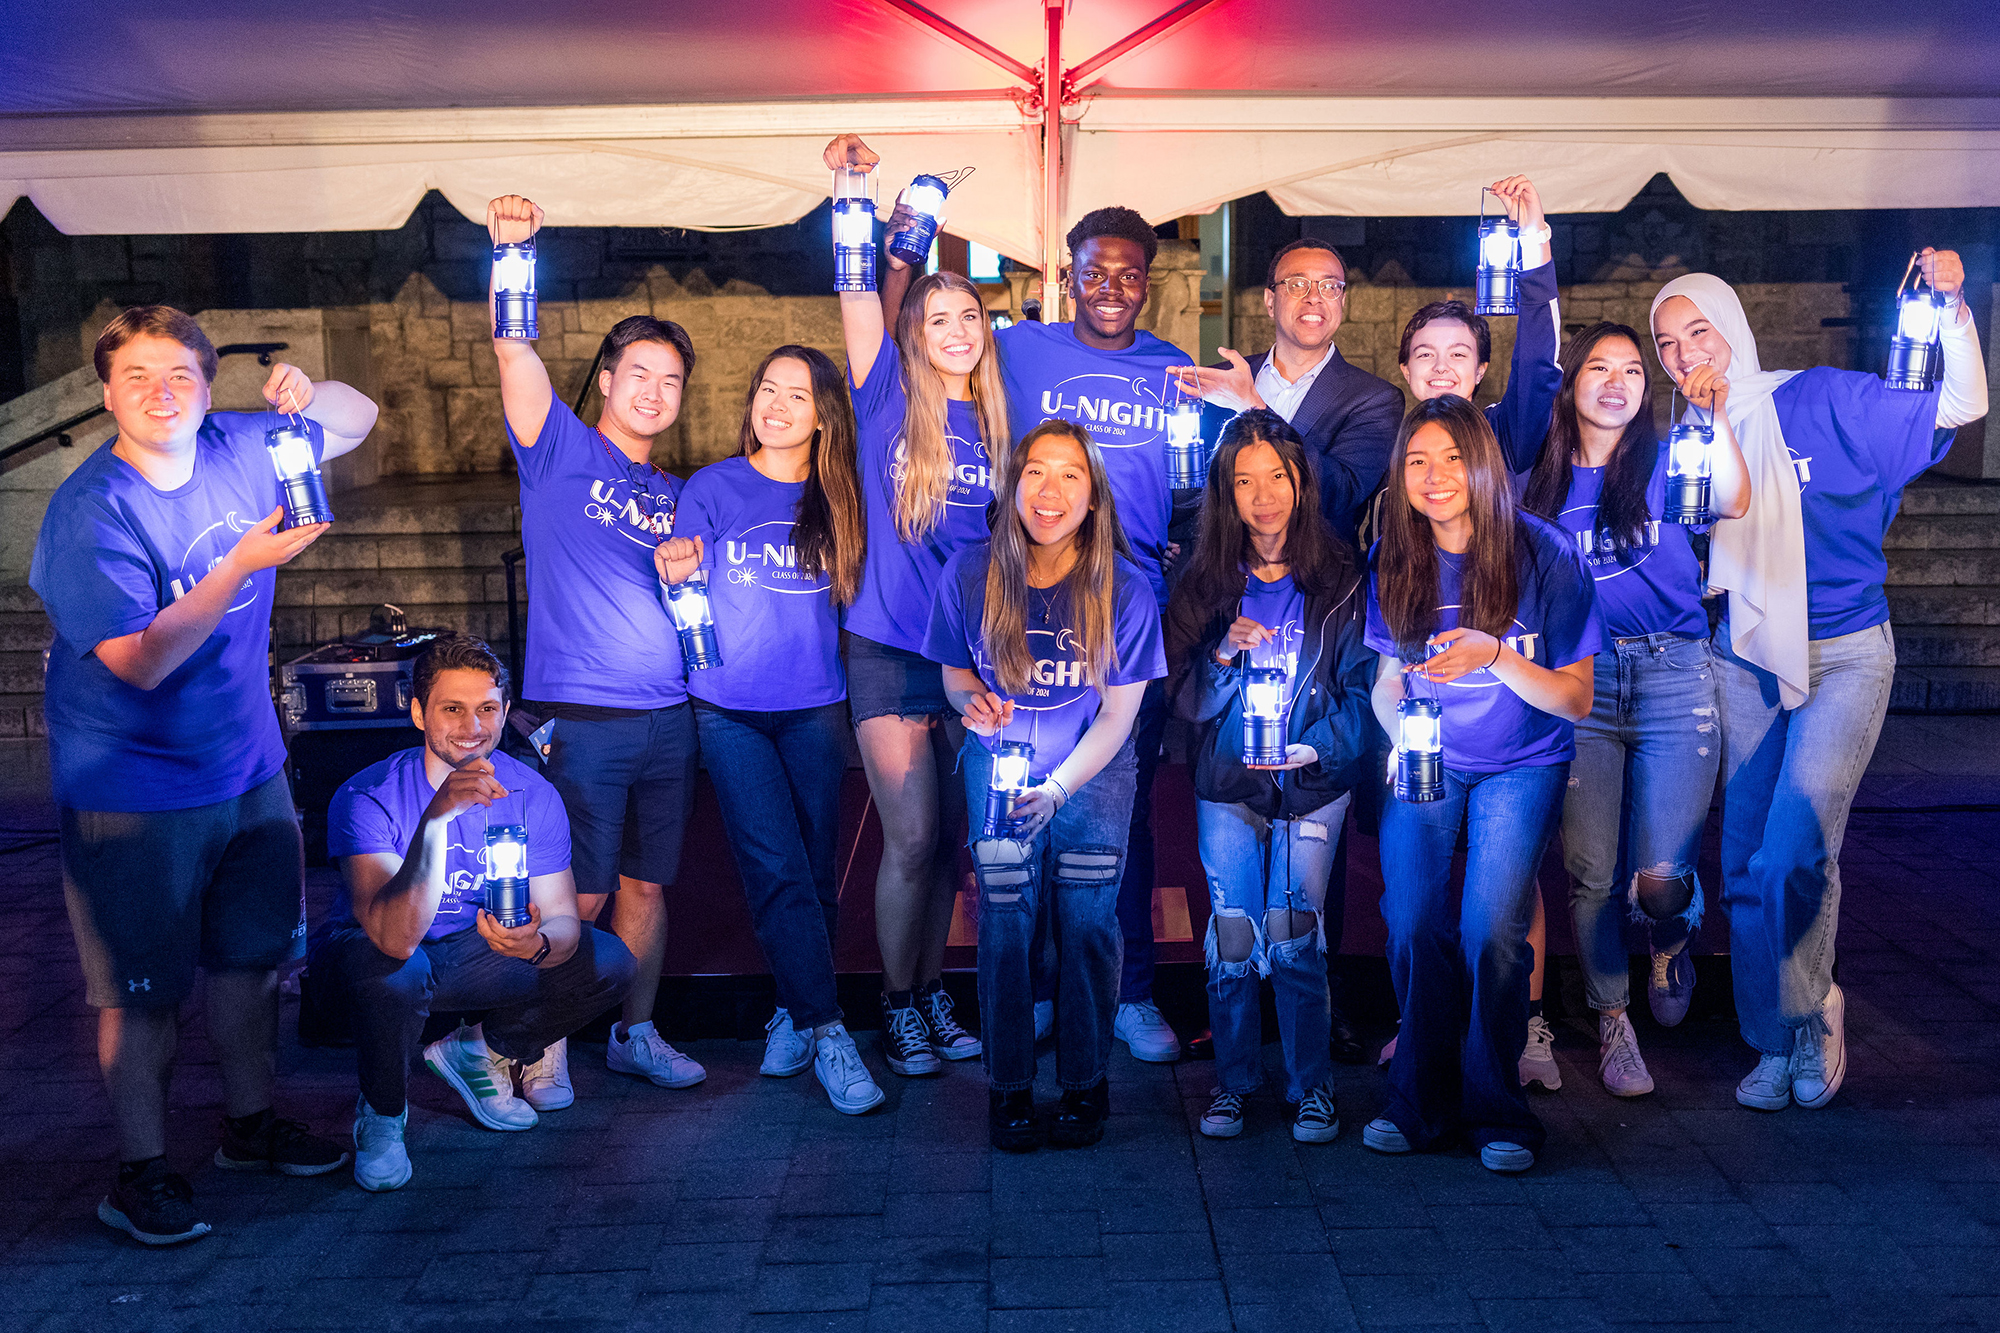 Wendell Pritchett and the members of the Class Board of 2022 in U-Night T-shirts pose with lanterns lit.